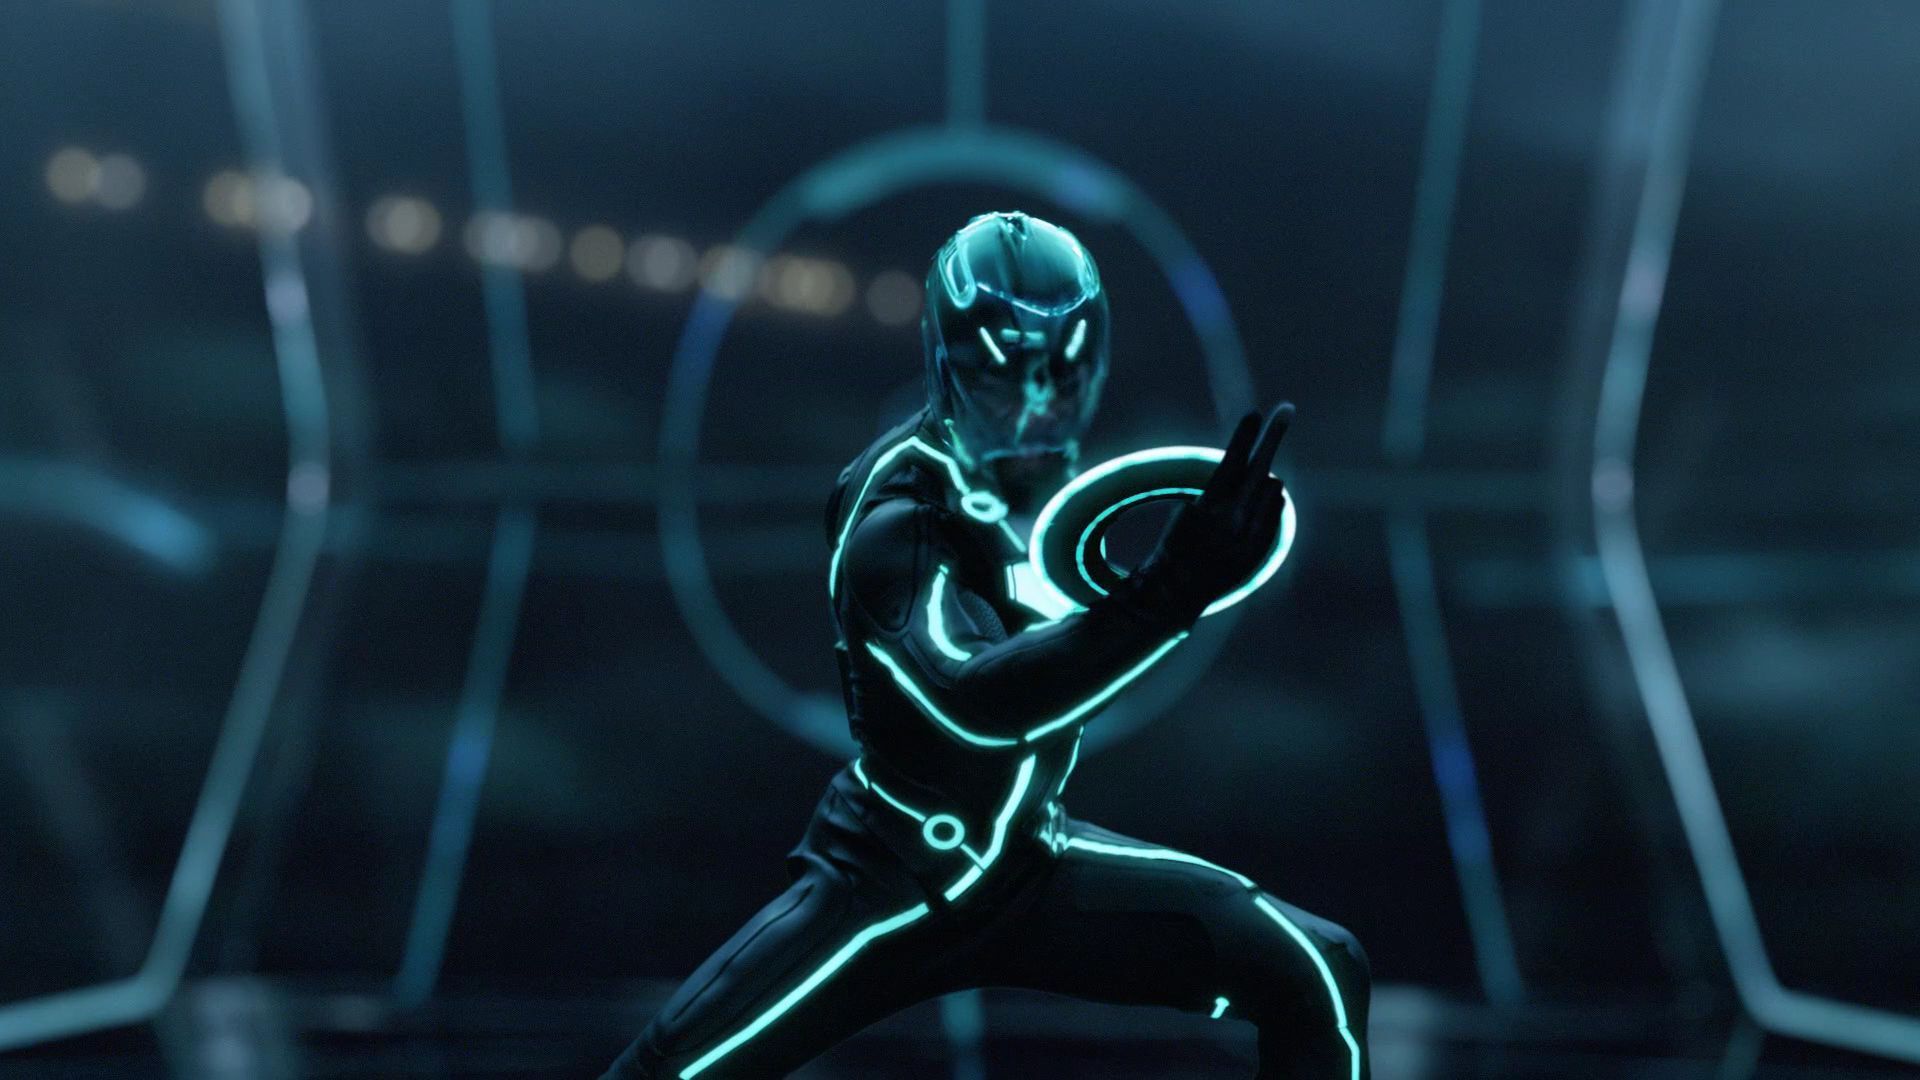 TRON 3' to Officially Begin Production this Fall. Rotoscopers. Tron legacy, Tron, Blockchain game